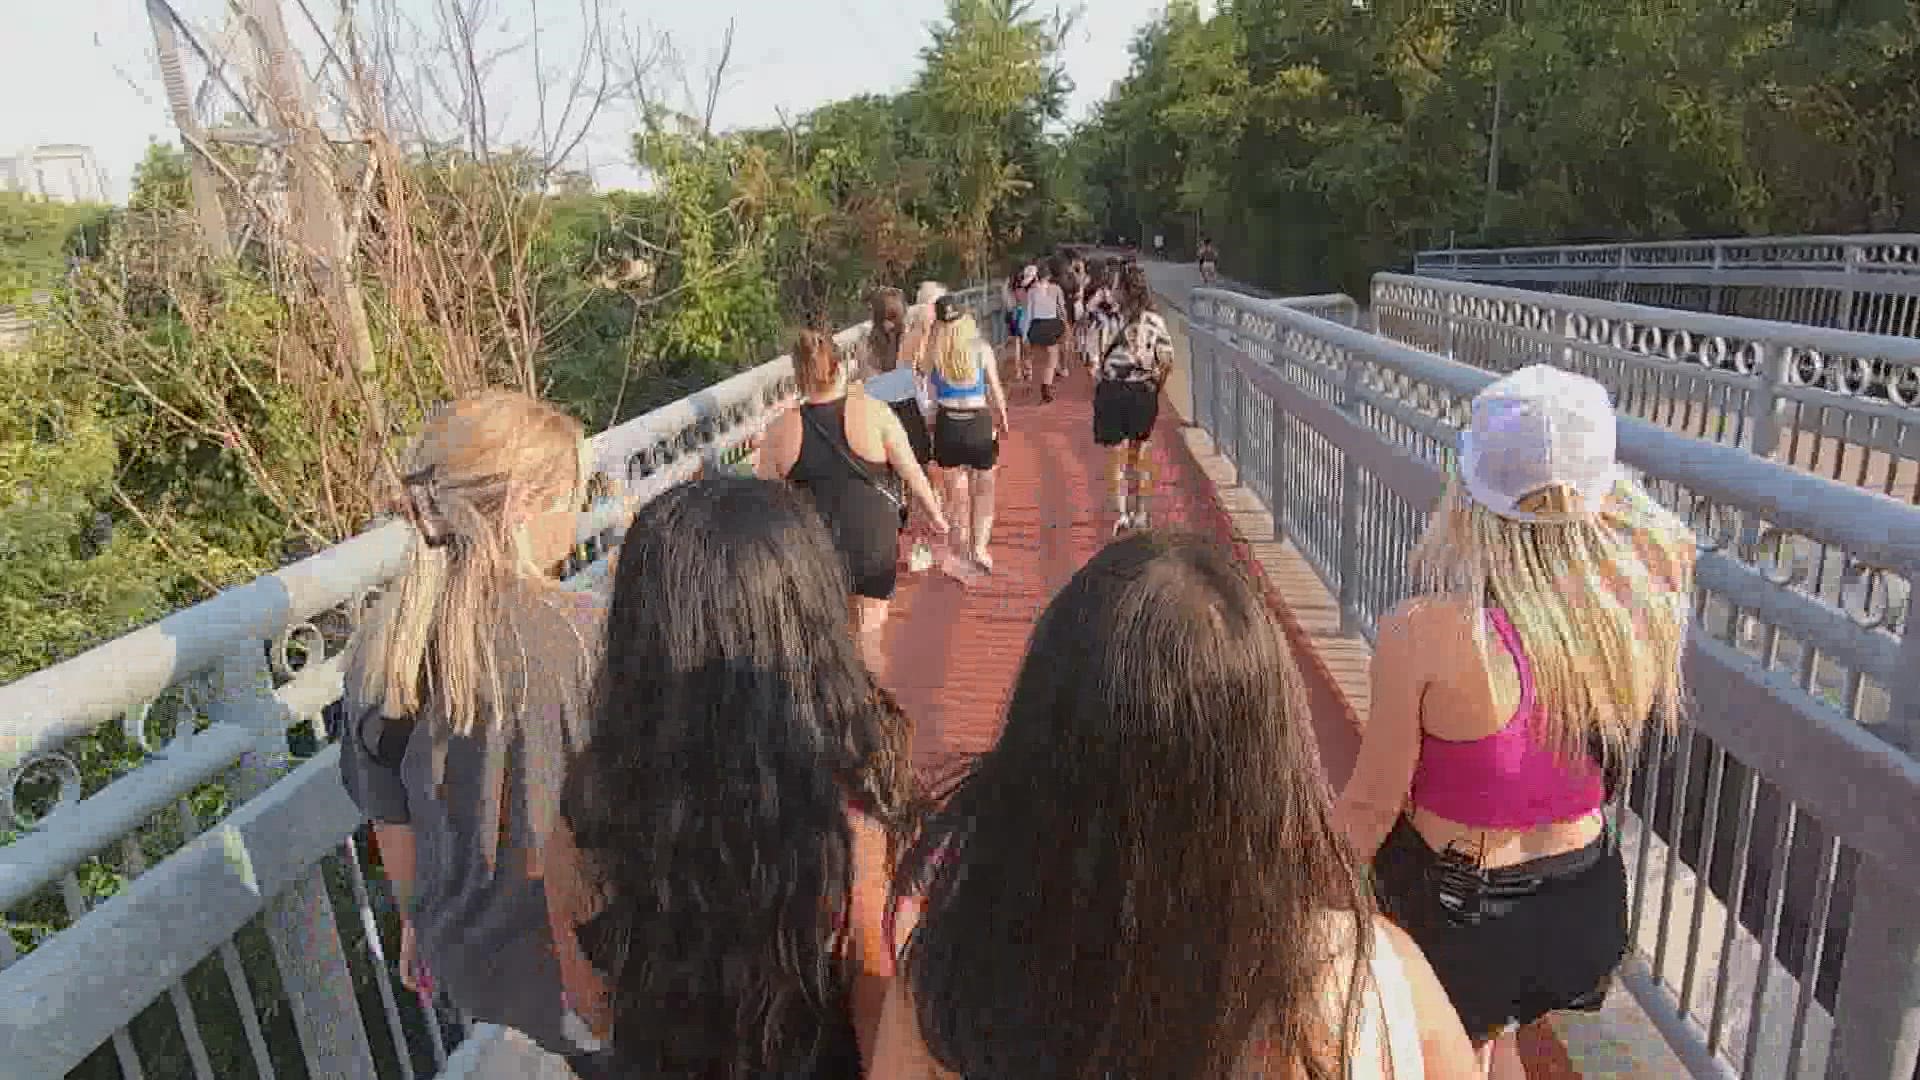 A group of more than 100 young women, dressed in their best athletic outfits and sets walking, talking and laughing on the Katy Trail in Dallas.